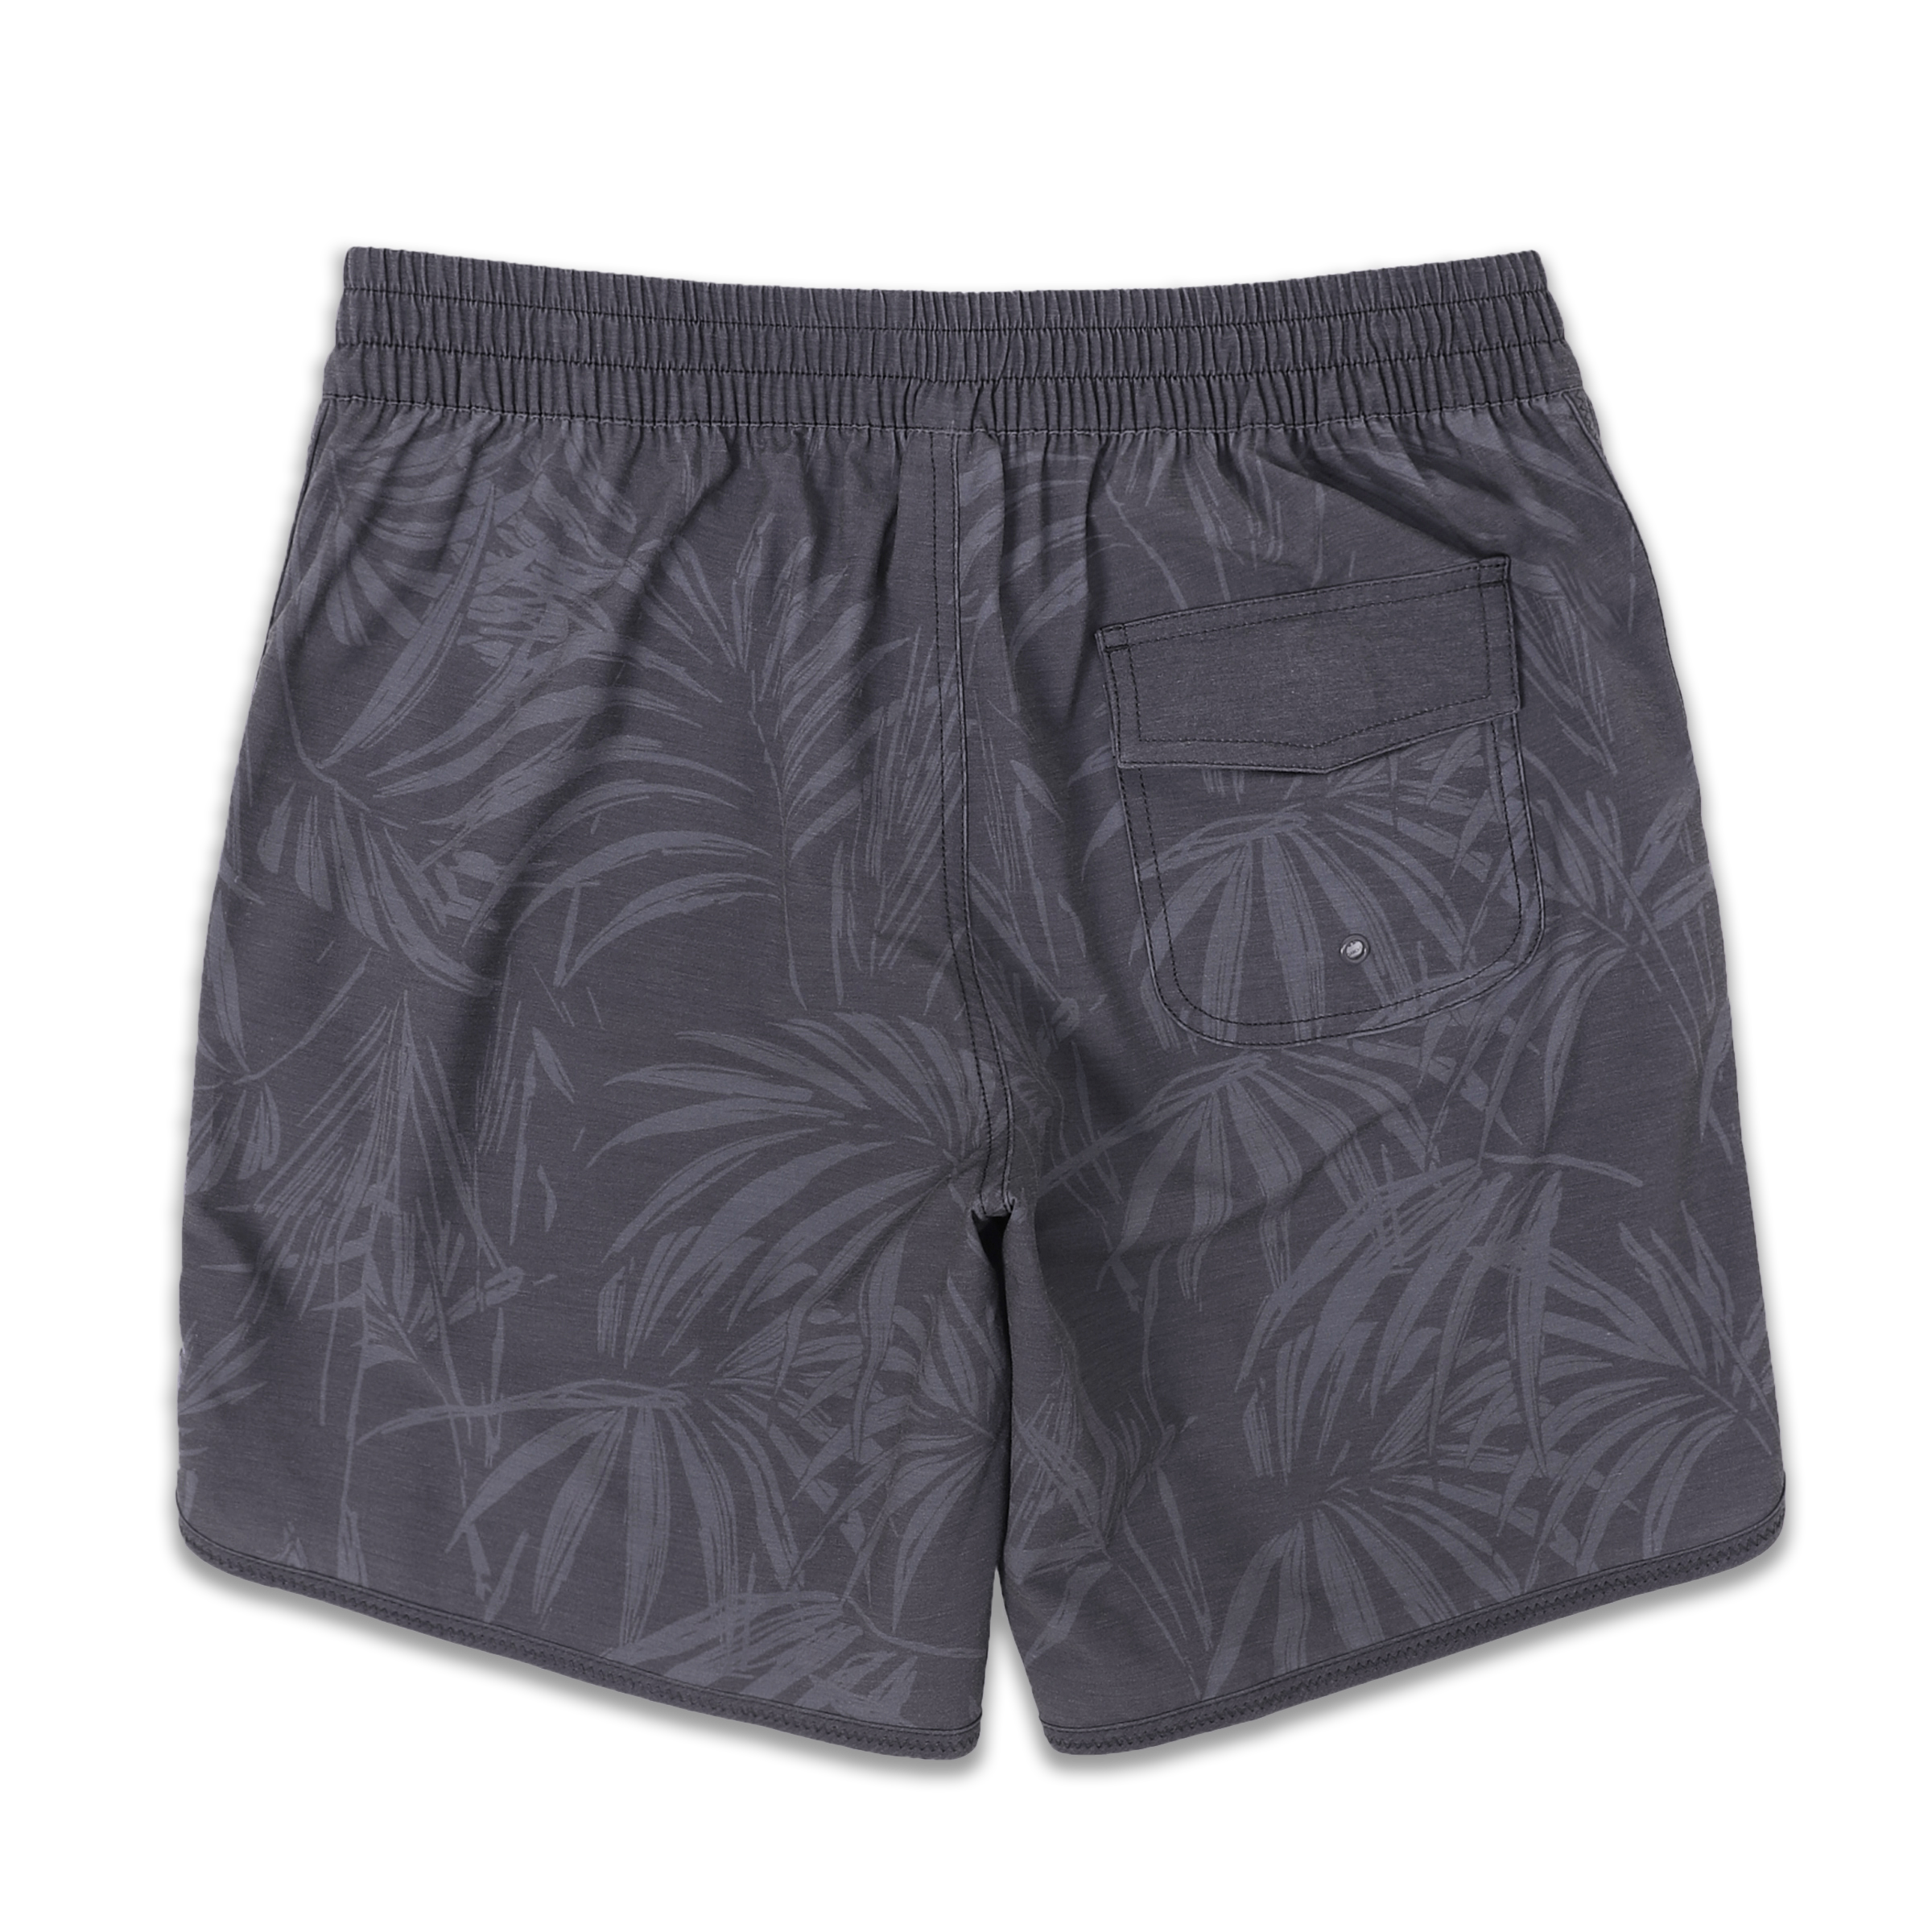 Board Short 8" Palms back with elastic waistband and hook and loop flap pocket with rivet for drainage